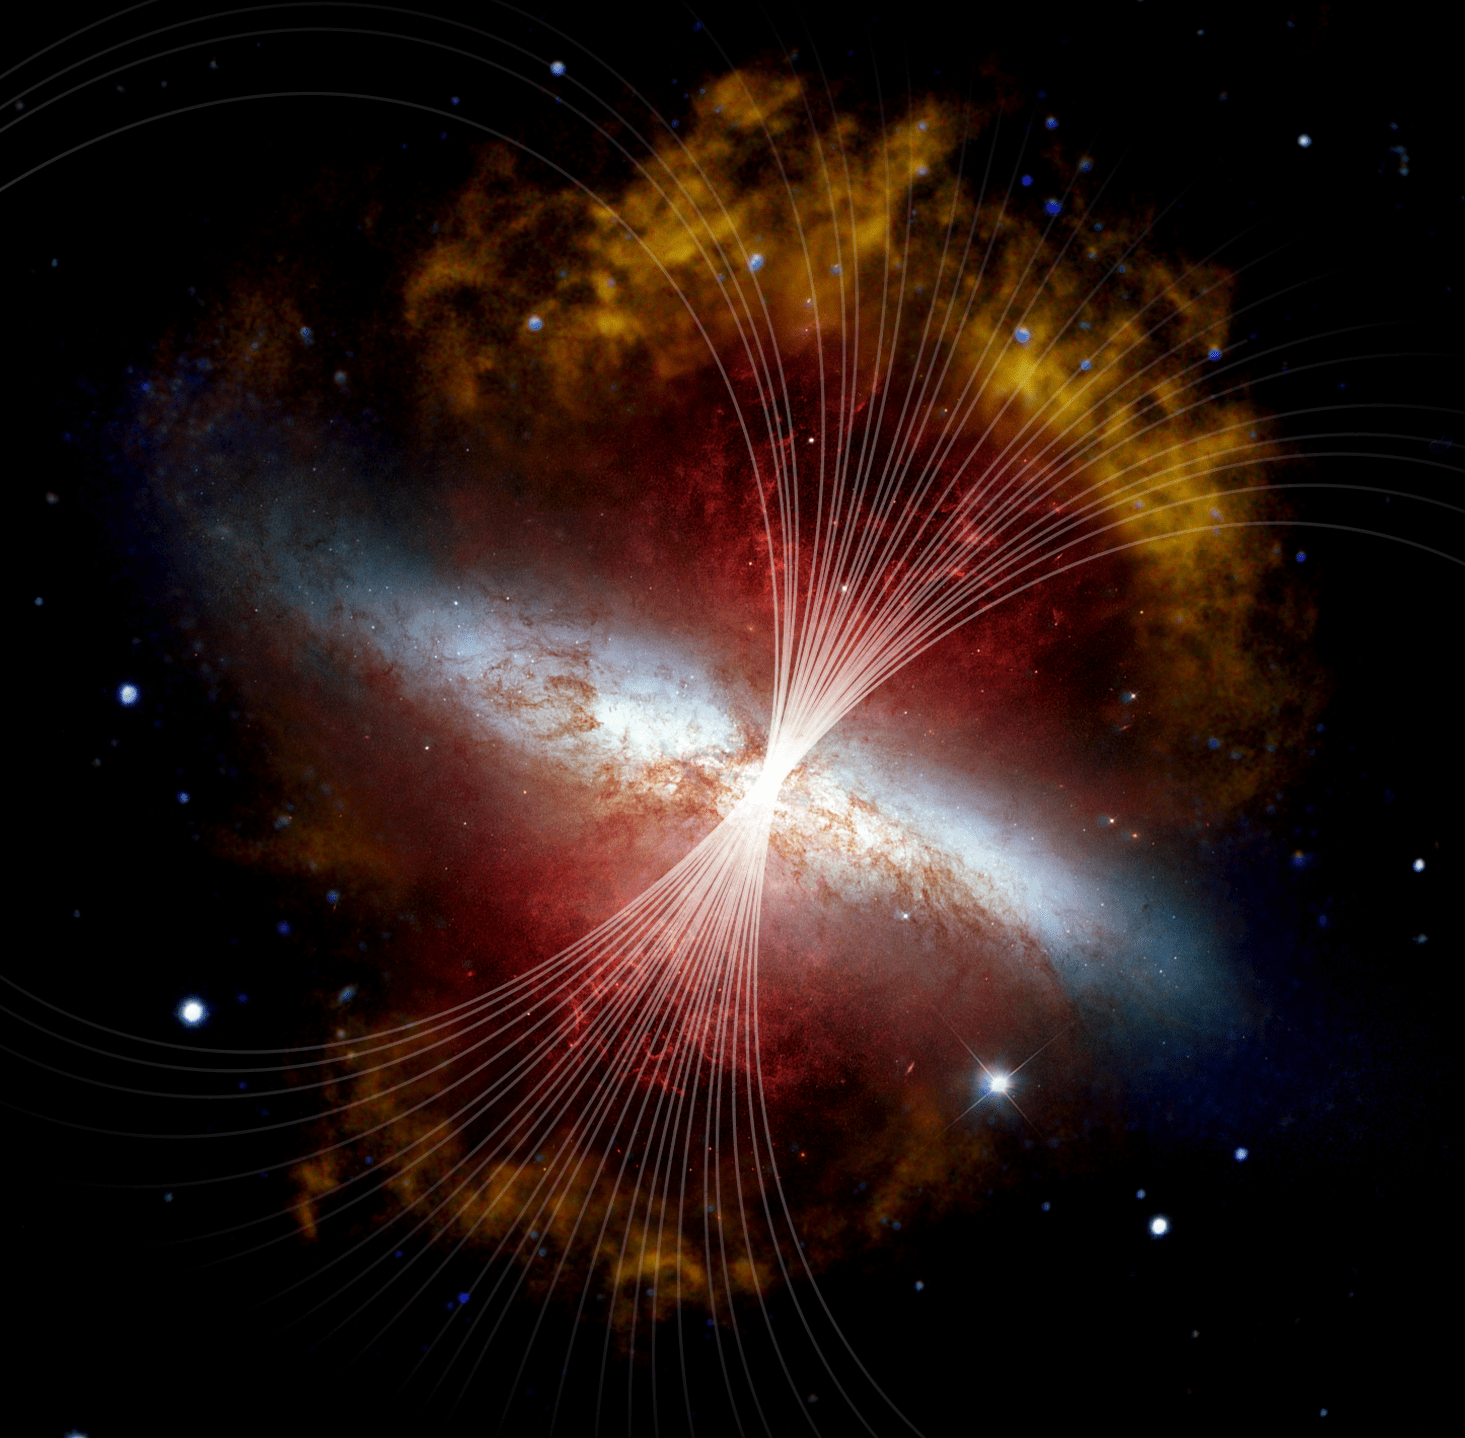 Magnetic fields in Messier 82, or the Cigar galaxy, are shown as lines over a white, red and yellow image of the galaxy.